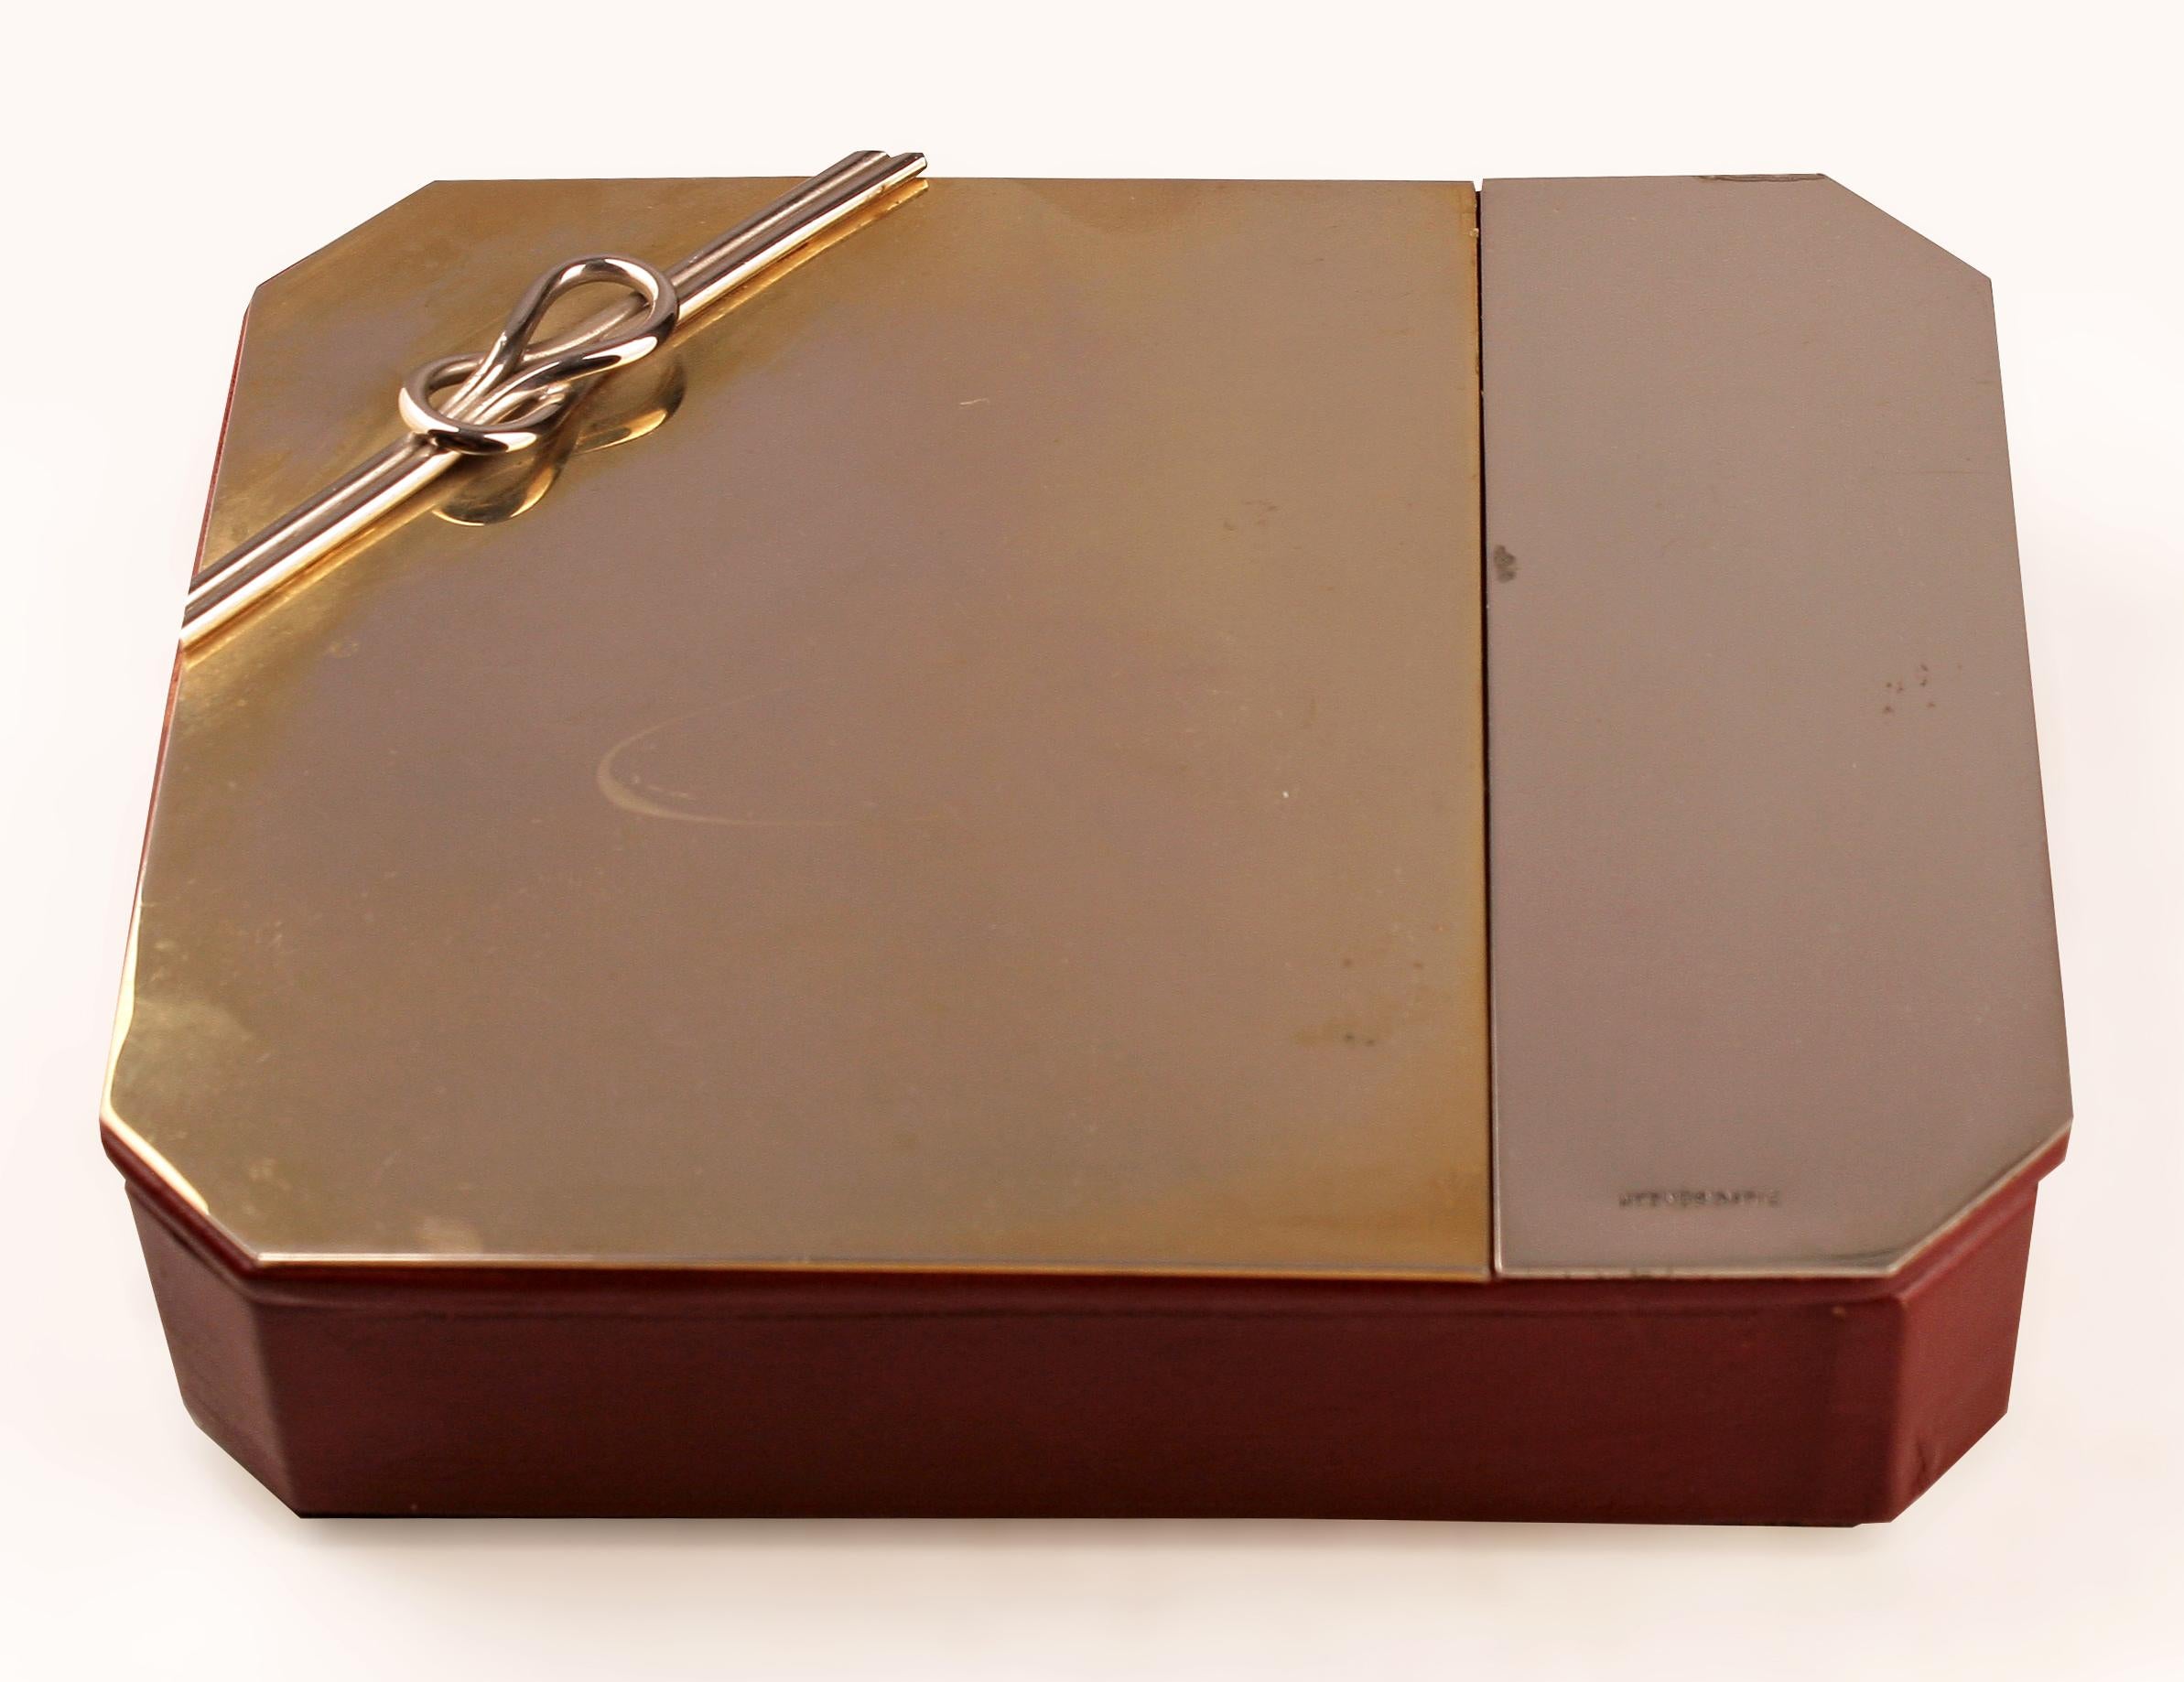 Mid-Century Modern Mid-20th Century Wooden Box with Silver Knot Lid by the French Firm Hermès Paris For Sale